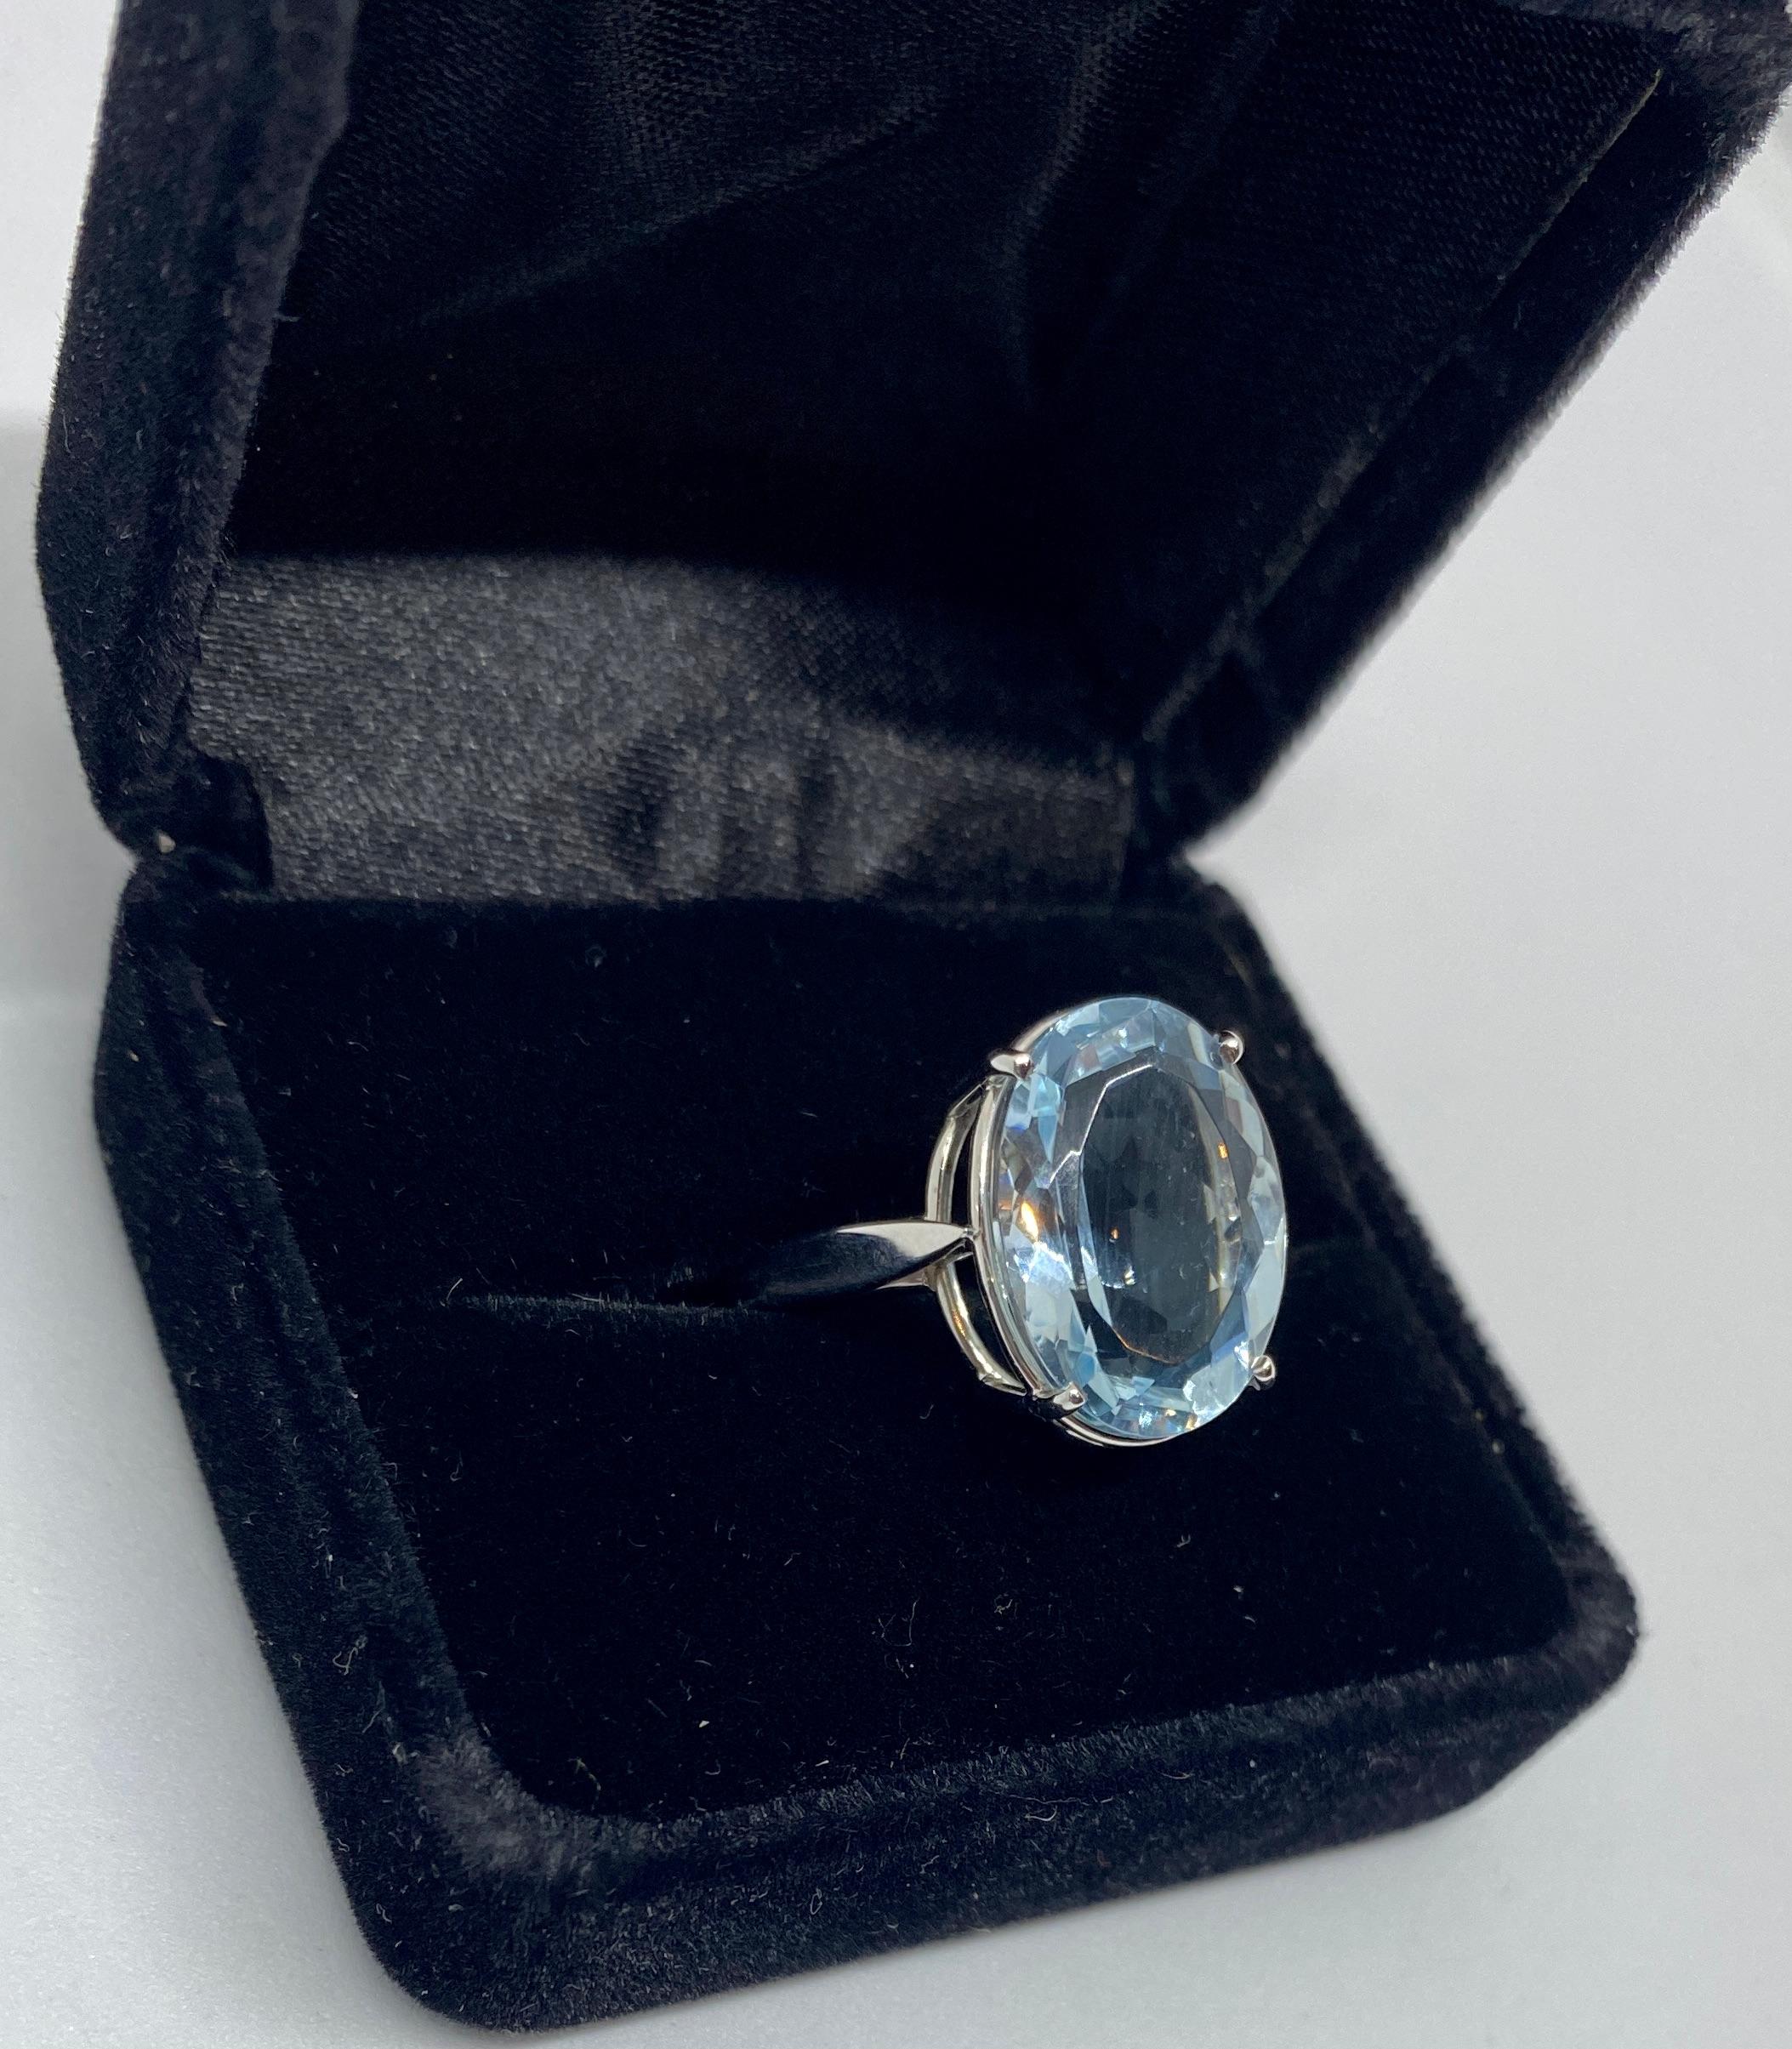 Contemporary 18 Karat White Gold Ring with Faceted Blue Oval Stone 